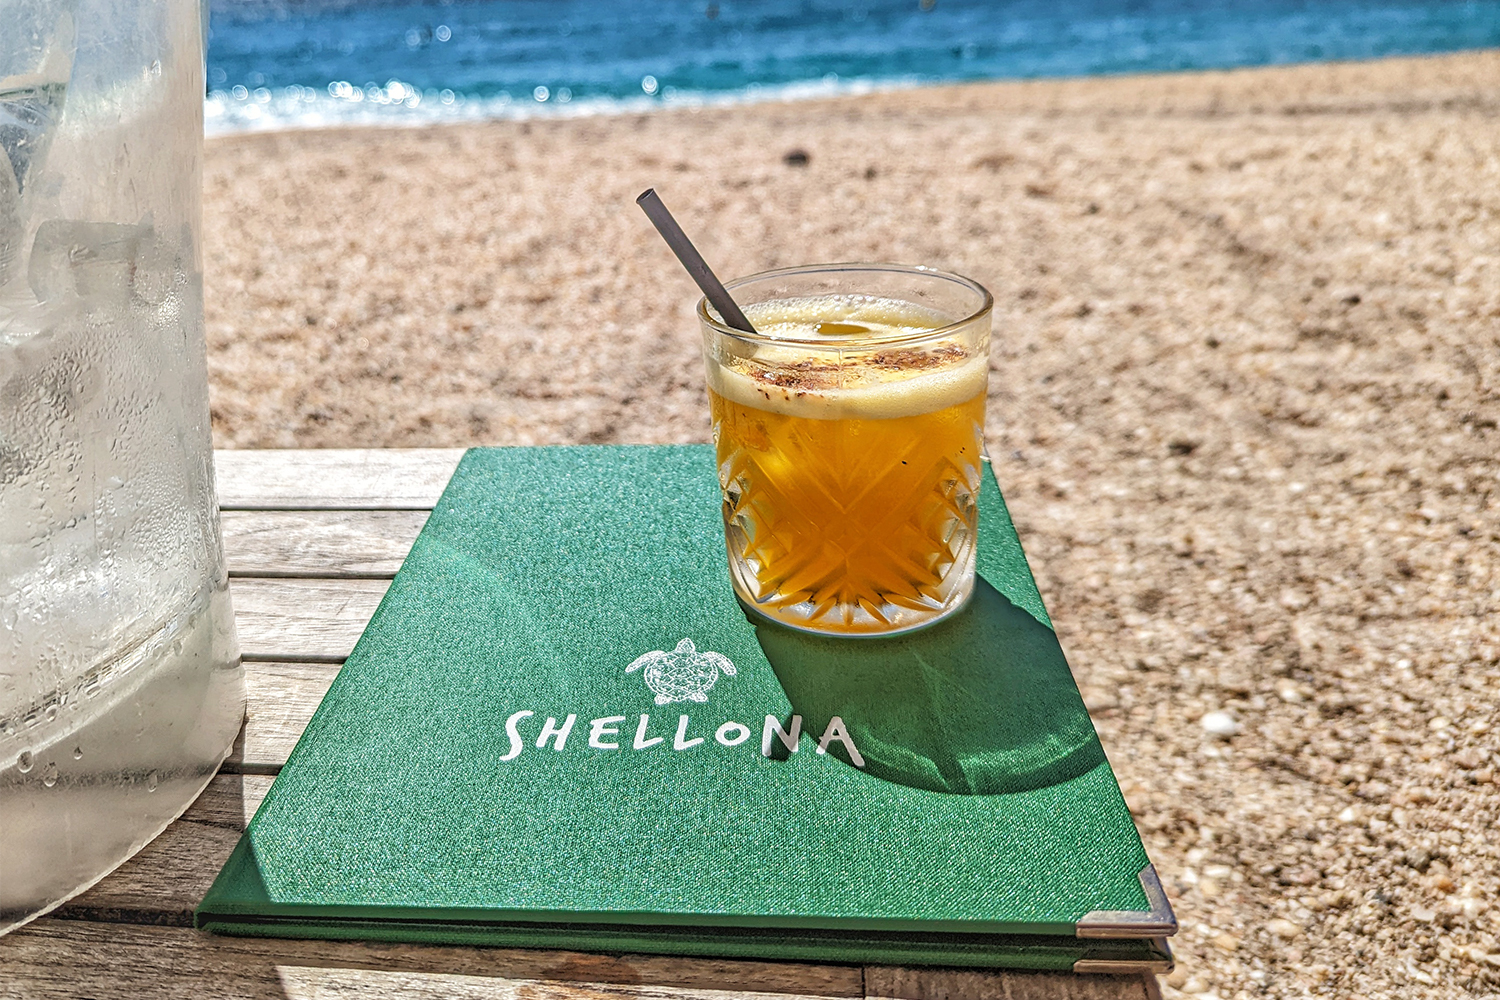 A cocktail on the sand at Shellona beach club in St. Barts